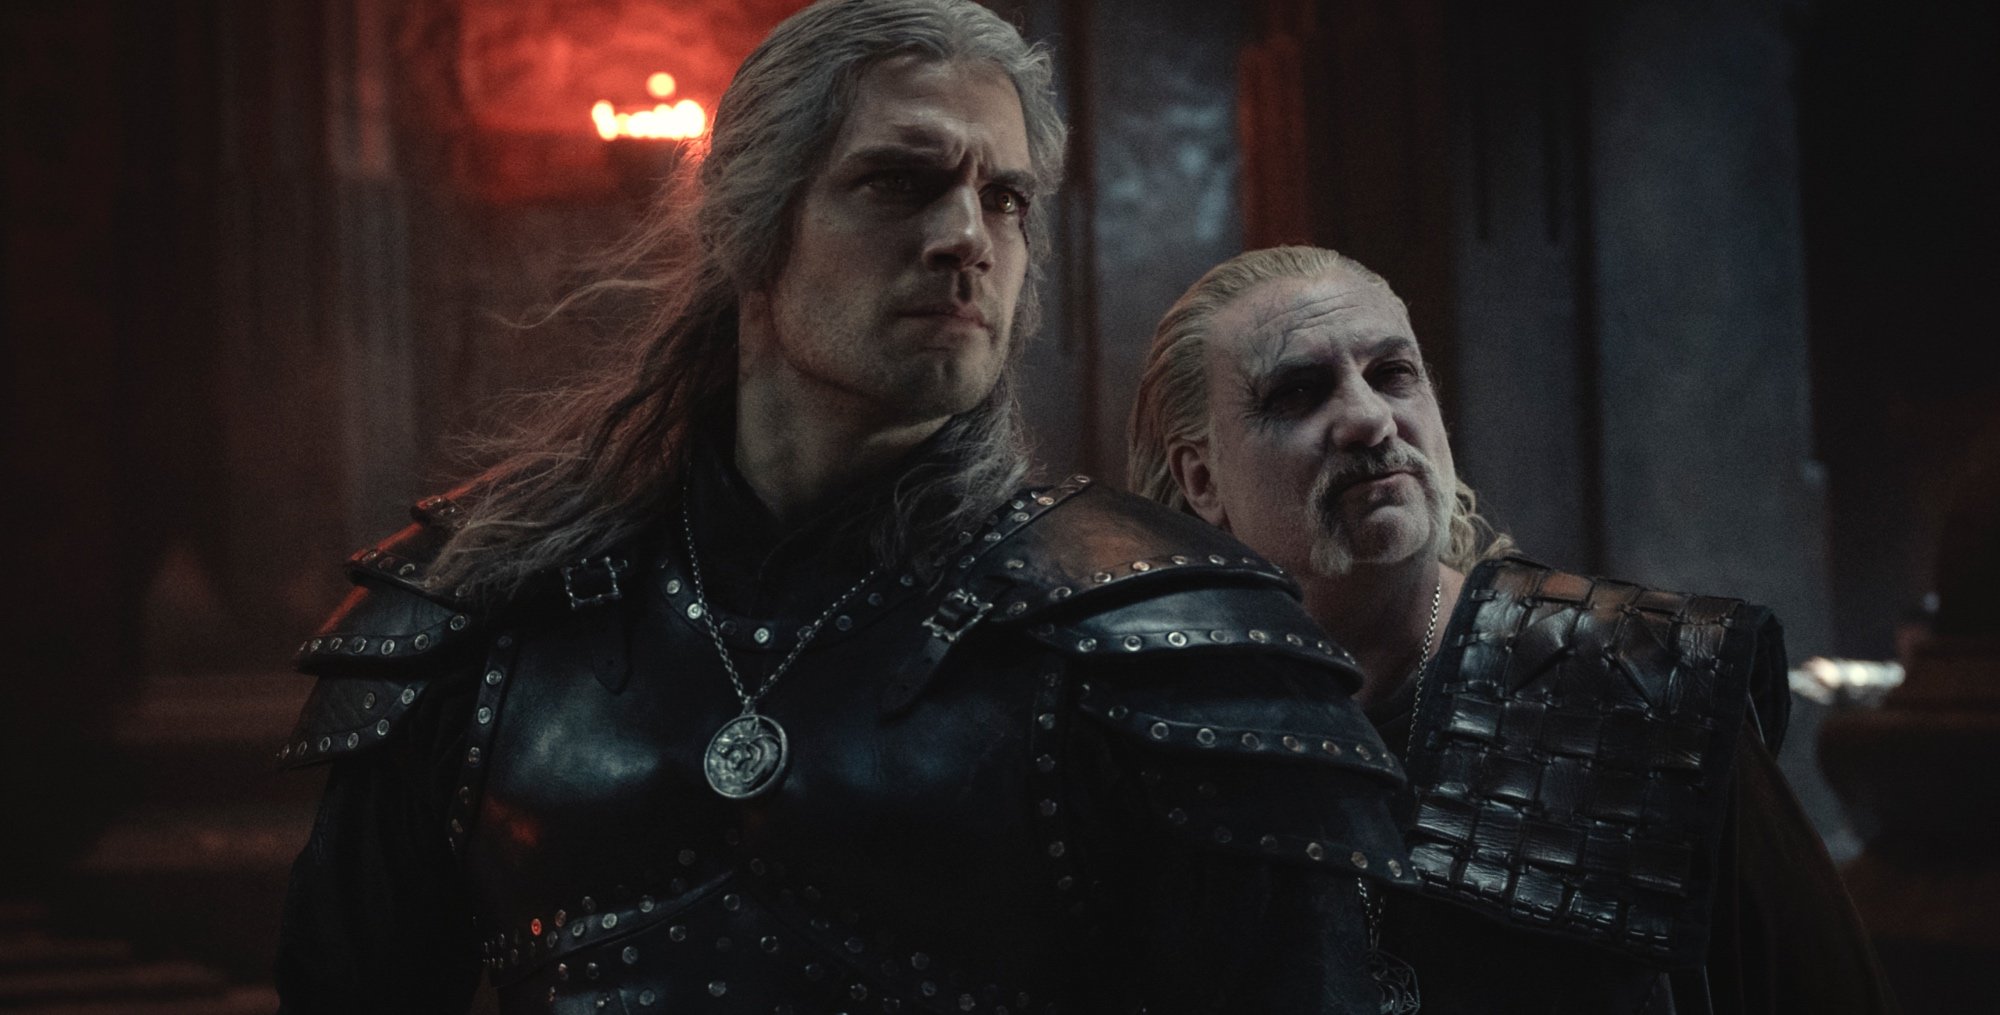 Geralt and Vesemir in 'The Witcher' Season 2 finale wearing medallions and armor.